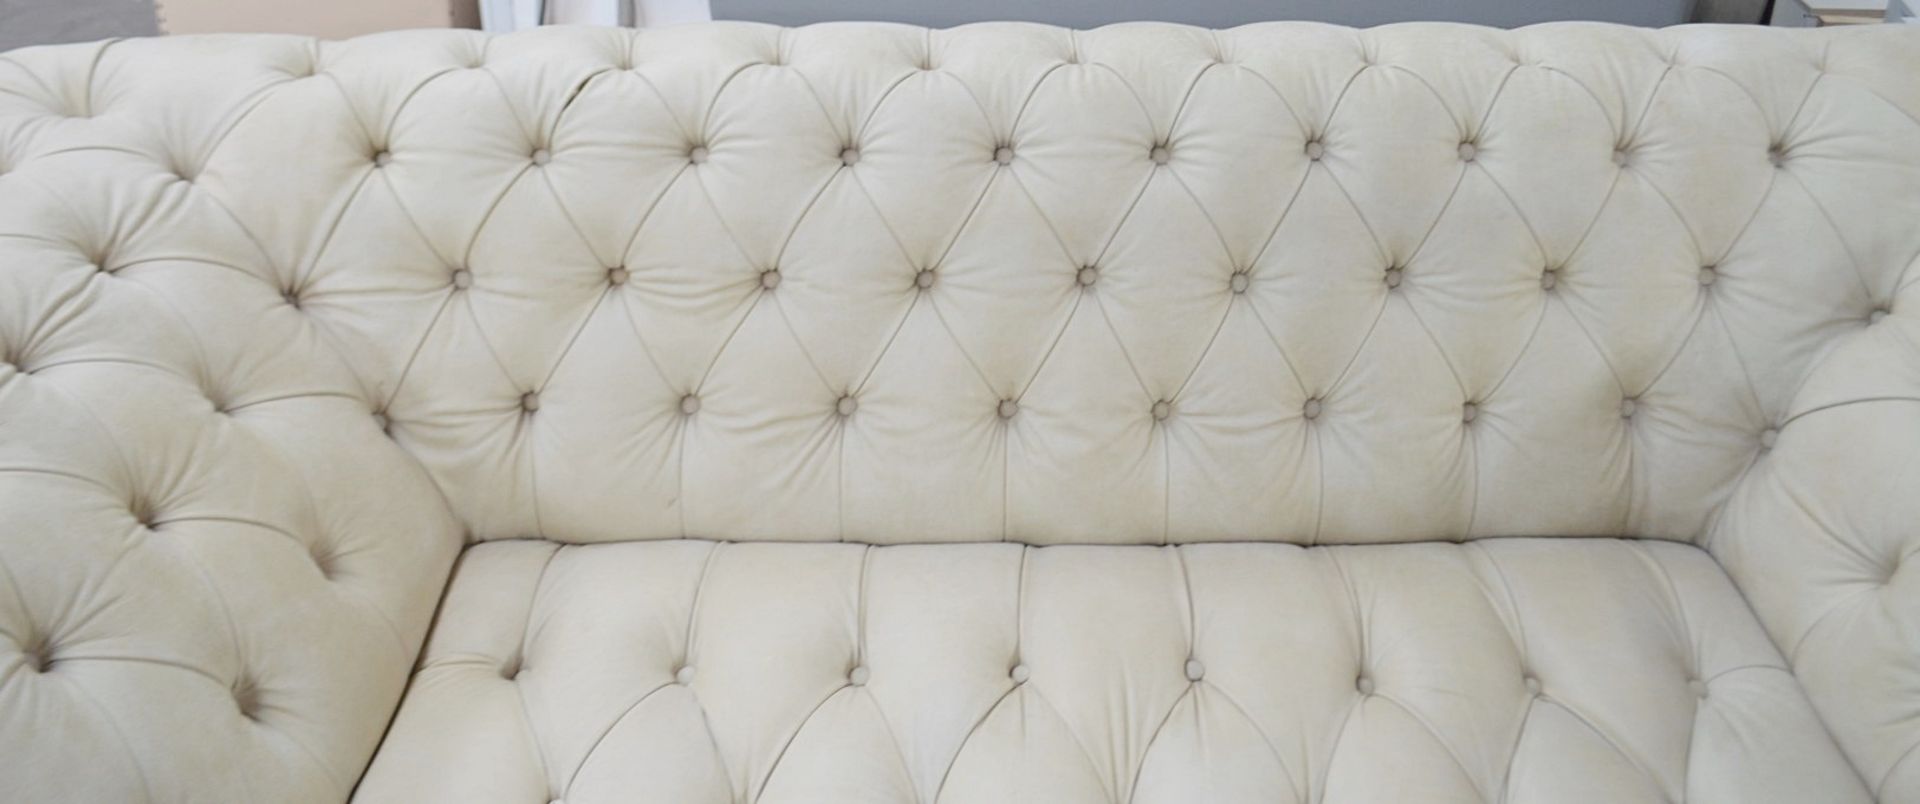 1 x Stunning Bespoke Cream Button-Back Leather Sofa - Professionally Handcrafted - Complete One-Off - Image 5 of 8